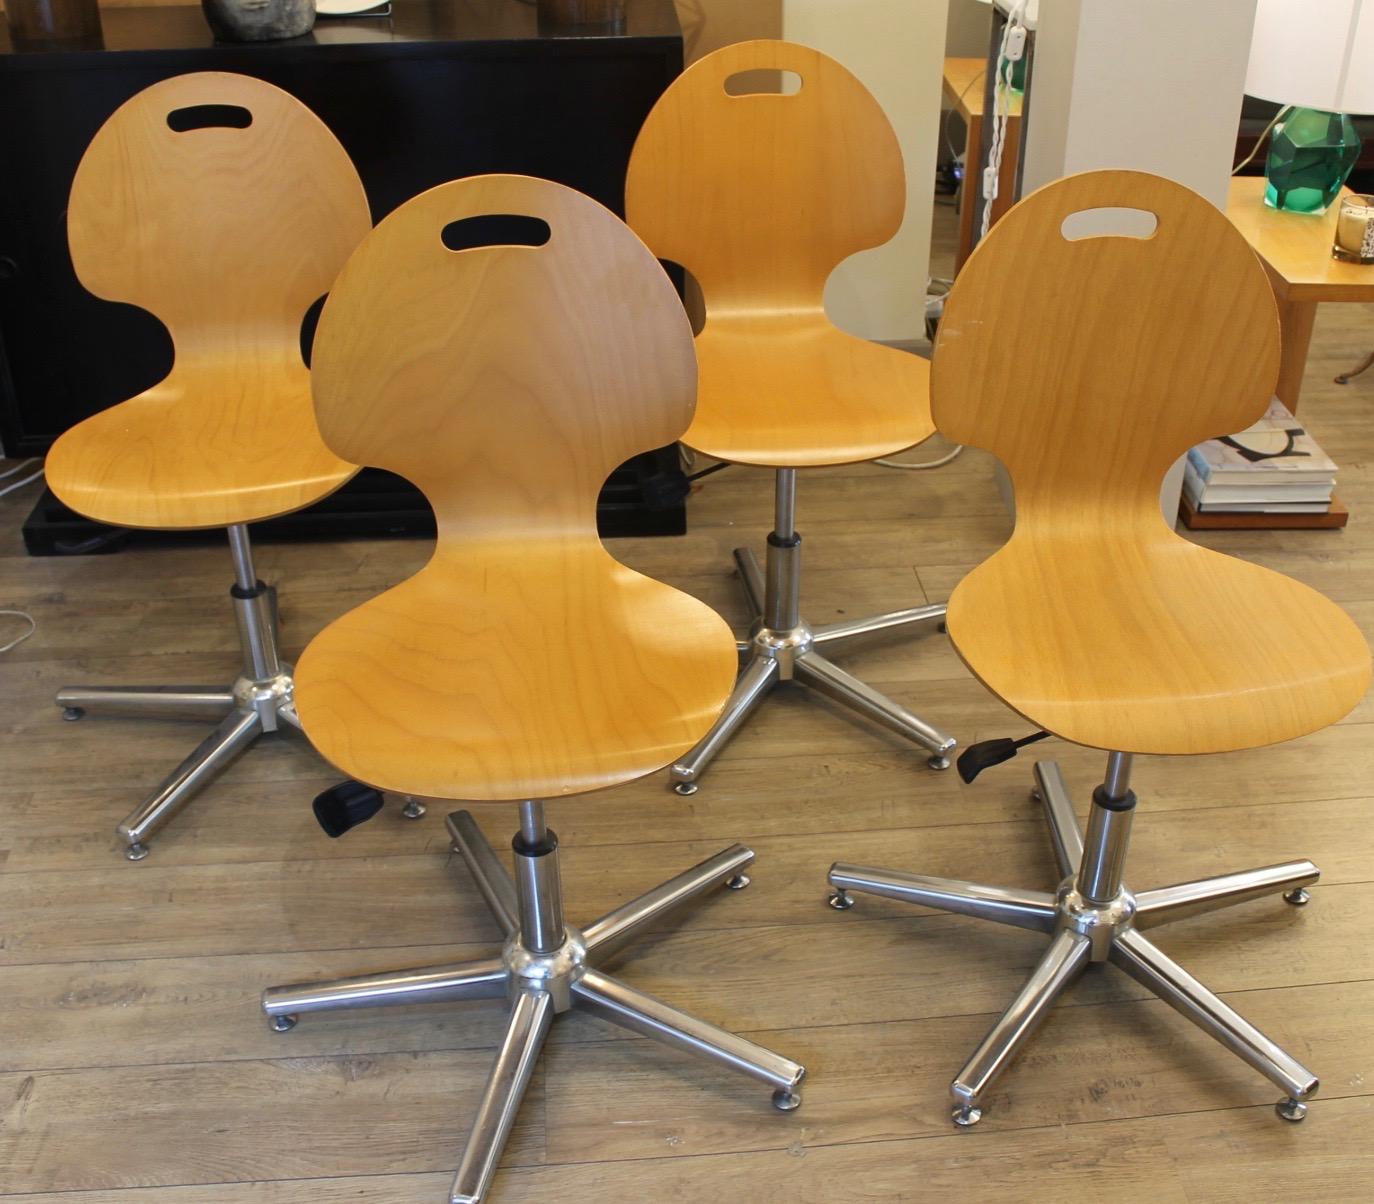 A series of 4 office chairs in light wood, aluminum legs. They are in good condition.
They have a pivoting and rising system. The lower seat is 22 cm. They can also be placed around a dining table.